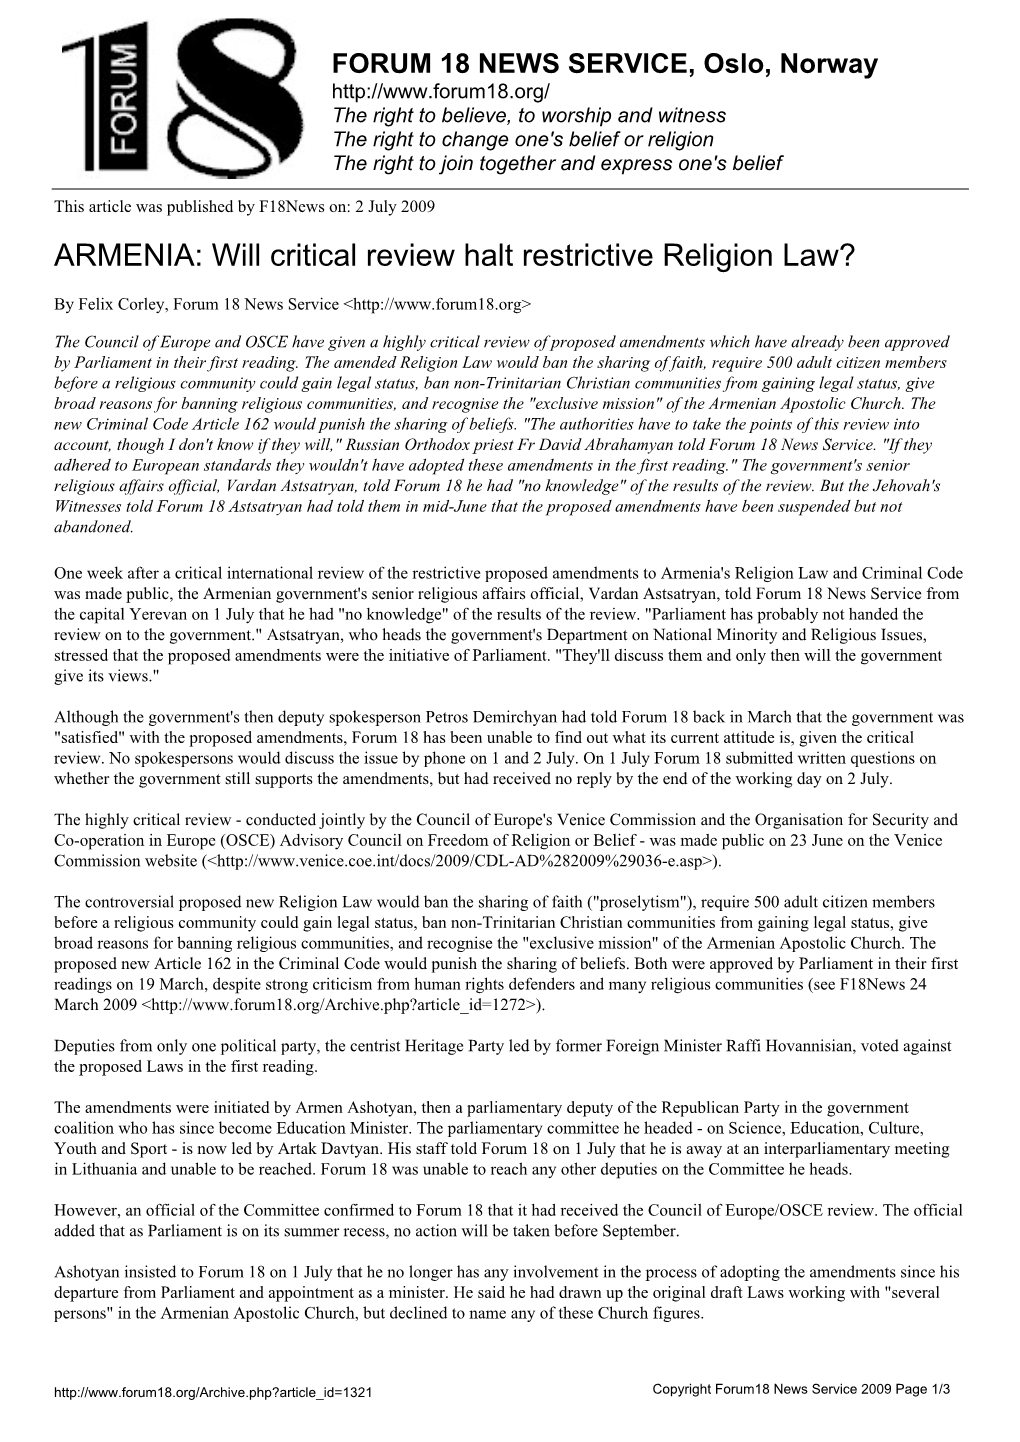 ARMENIA: Will Critical Review Halt Restrictive Religion Law?